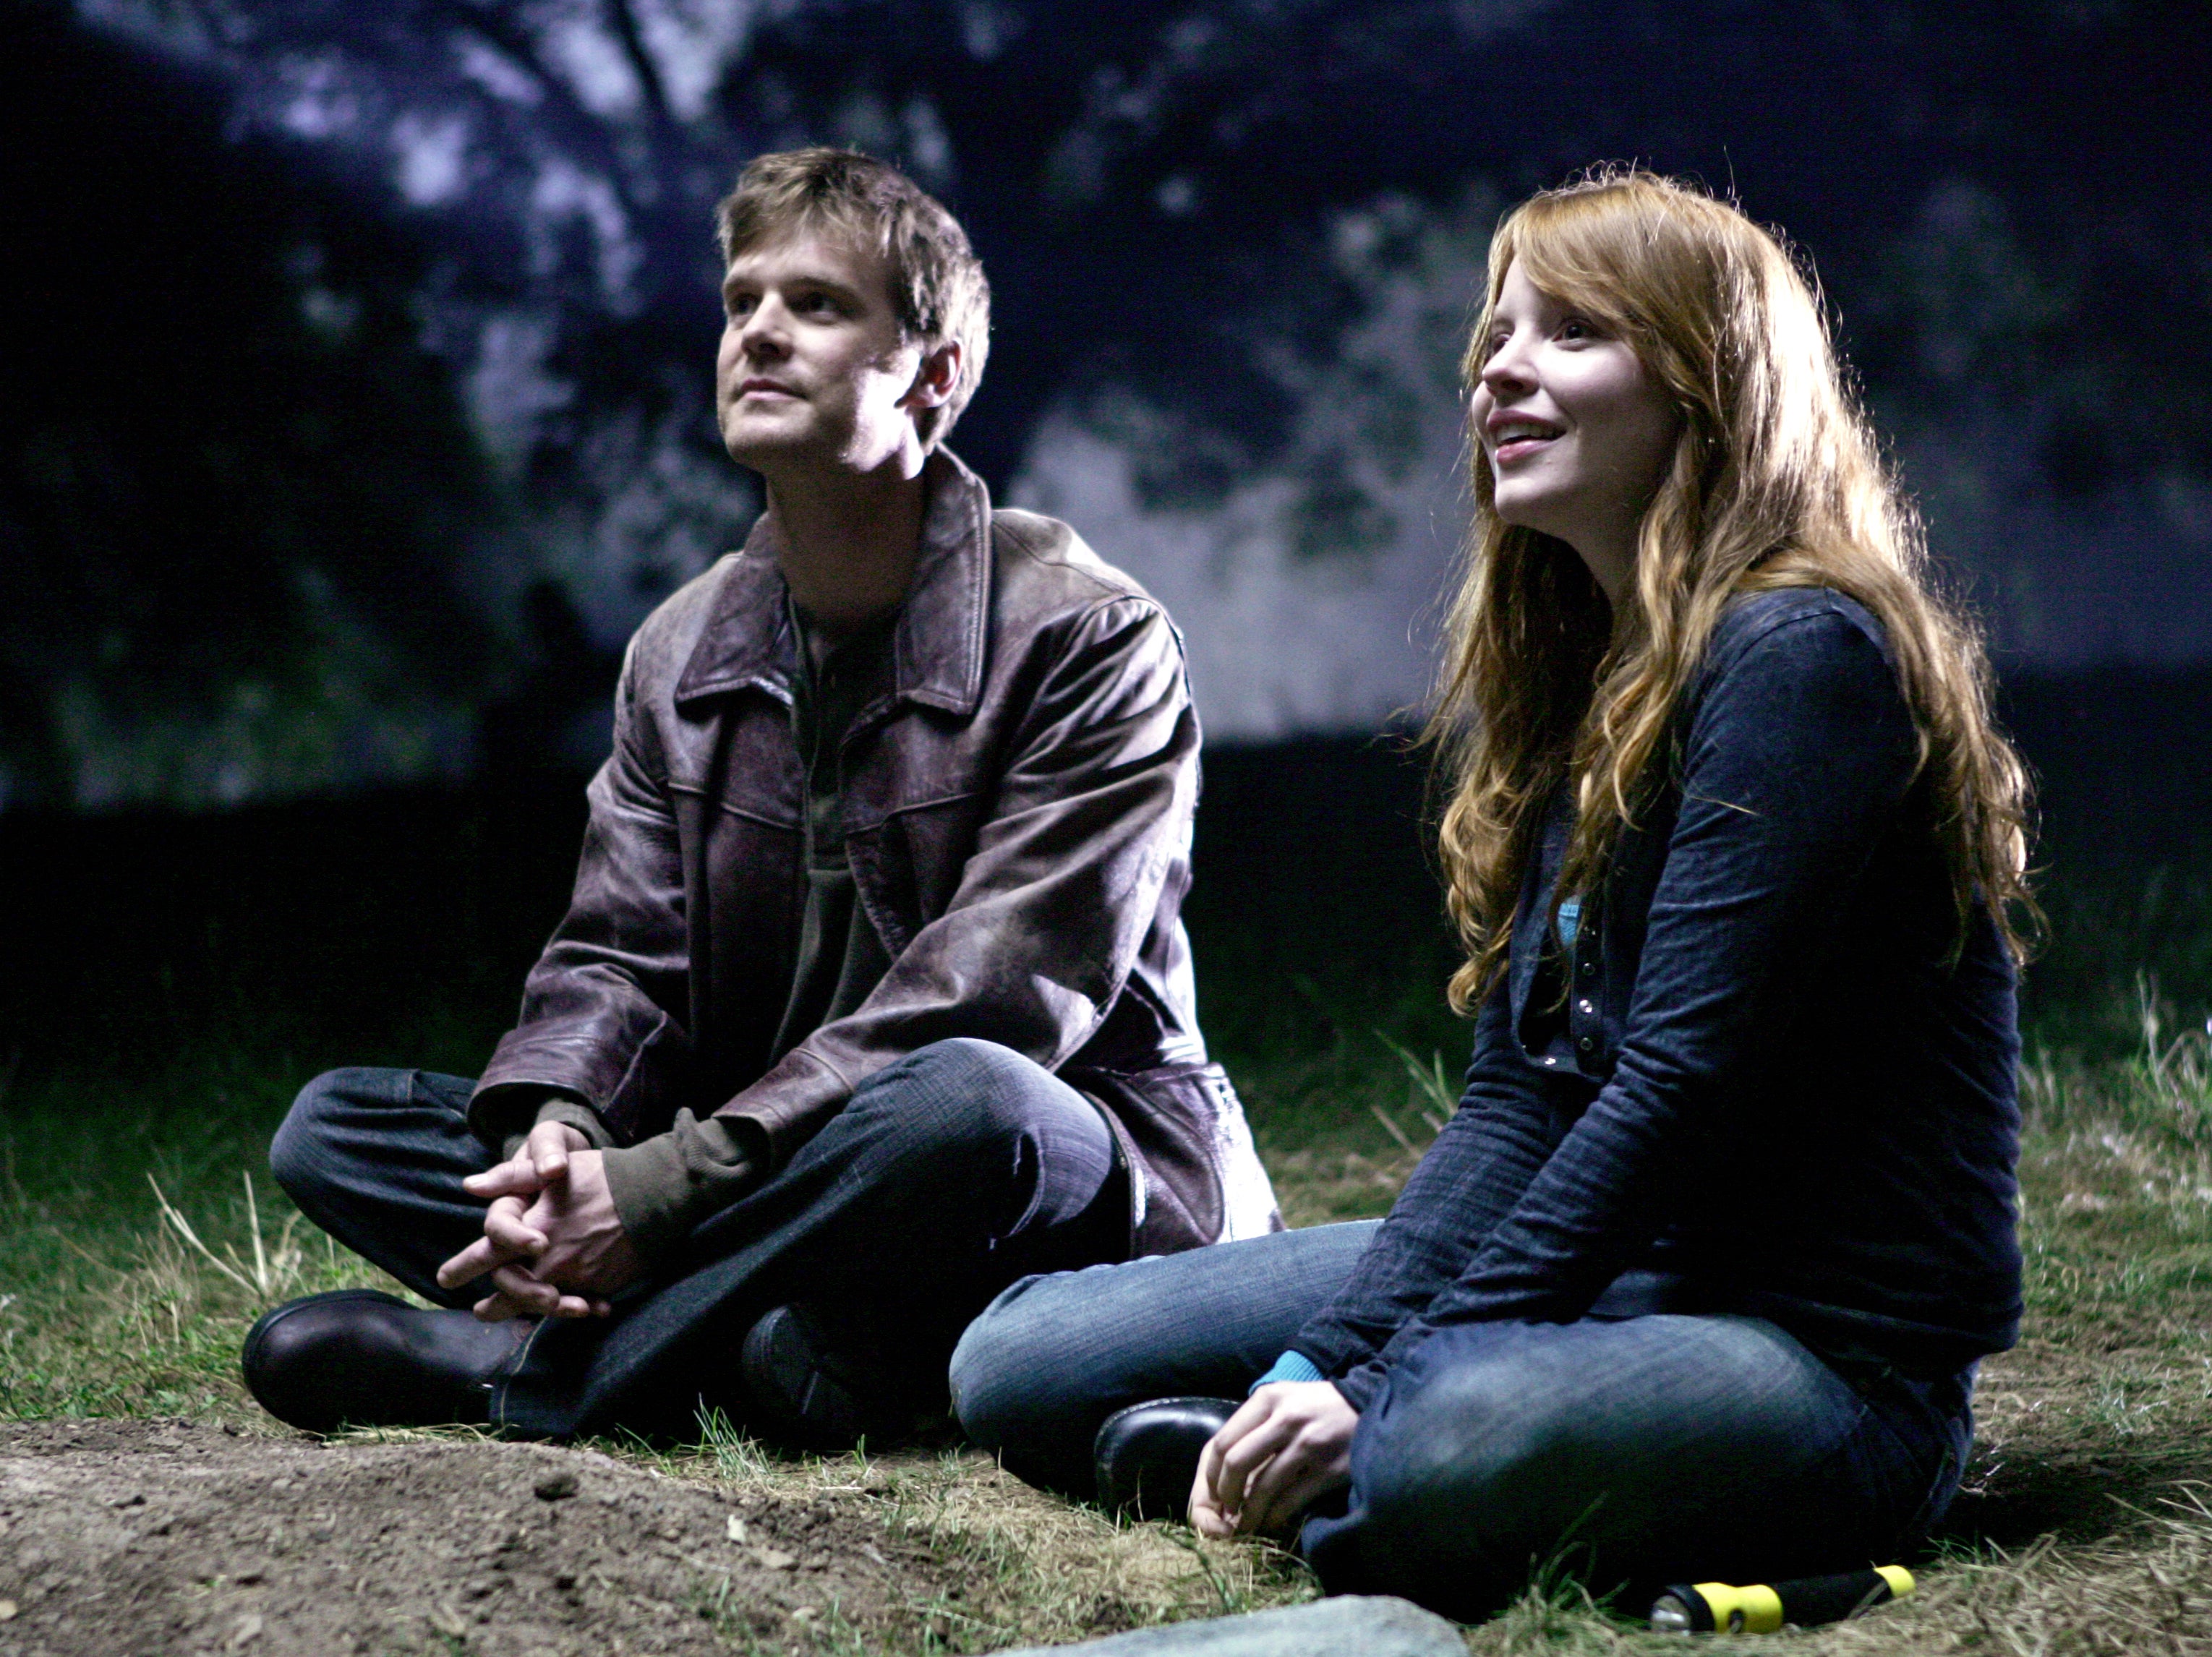 All that lives, lives forever: Nate (Peter Krause) and Claire (Lauren Ambrose) hang out after a tragic death